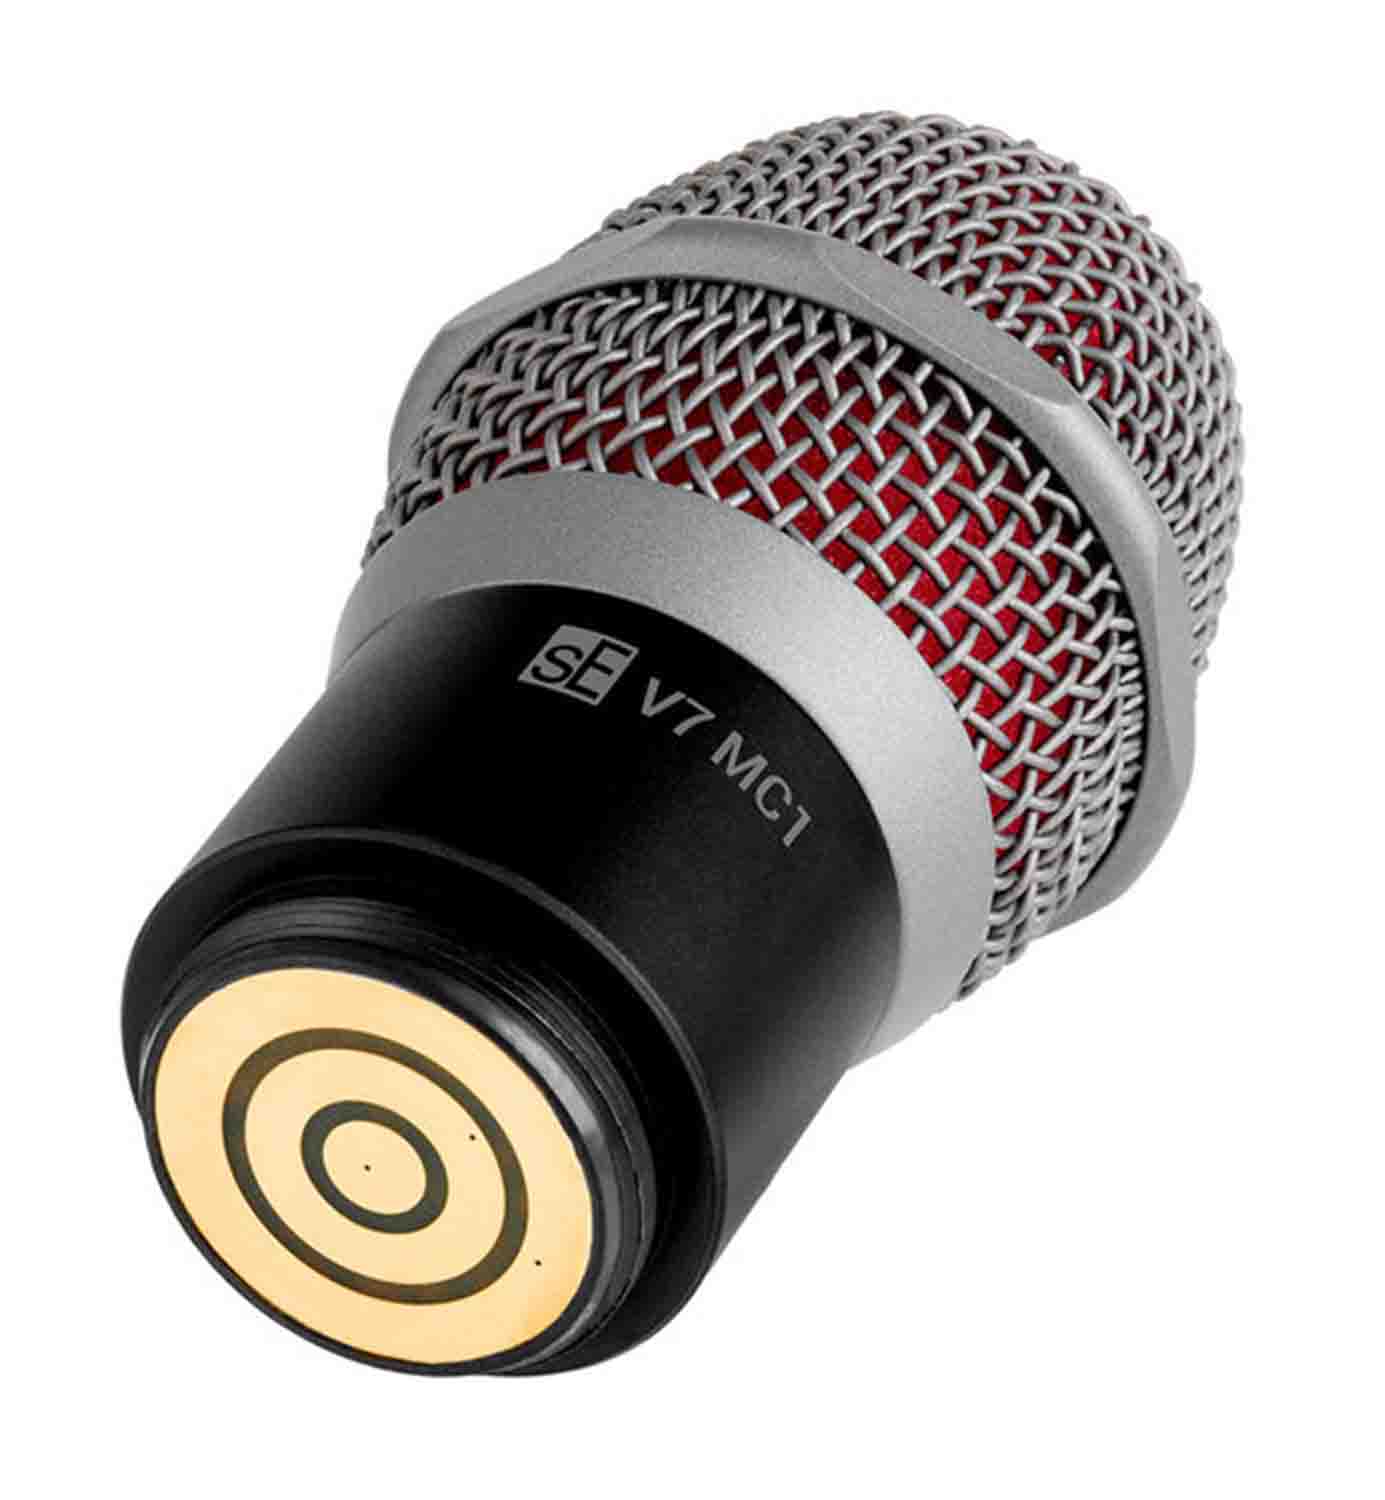 sE Electronics V7 MC1 Supercardioid Handheld Dynamic Microphone Capsule for Shure Wireless - Hollywood DJ